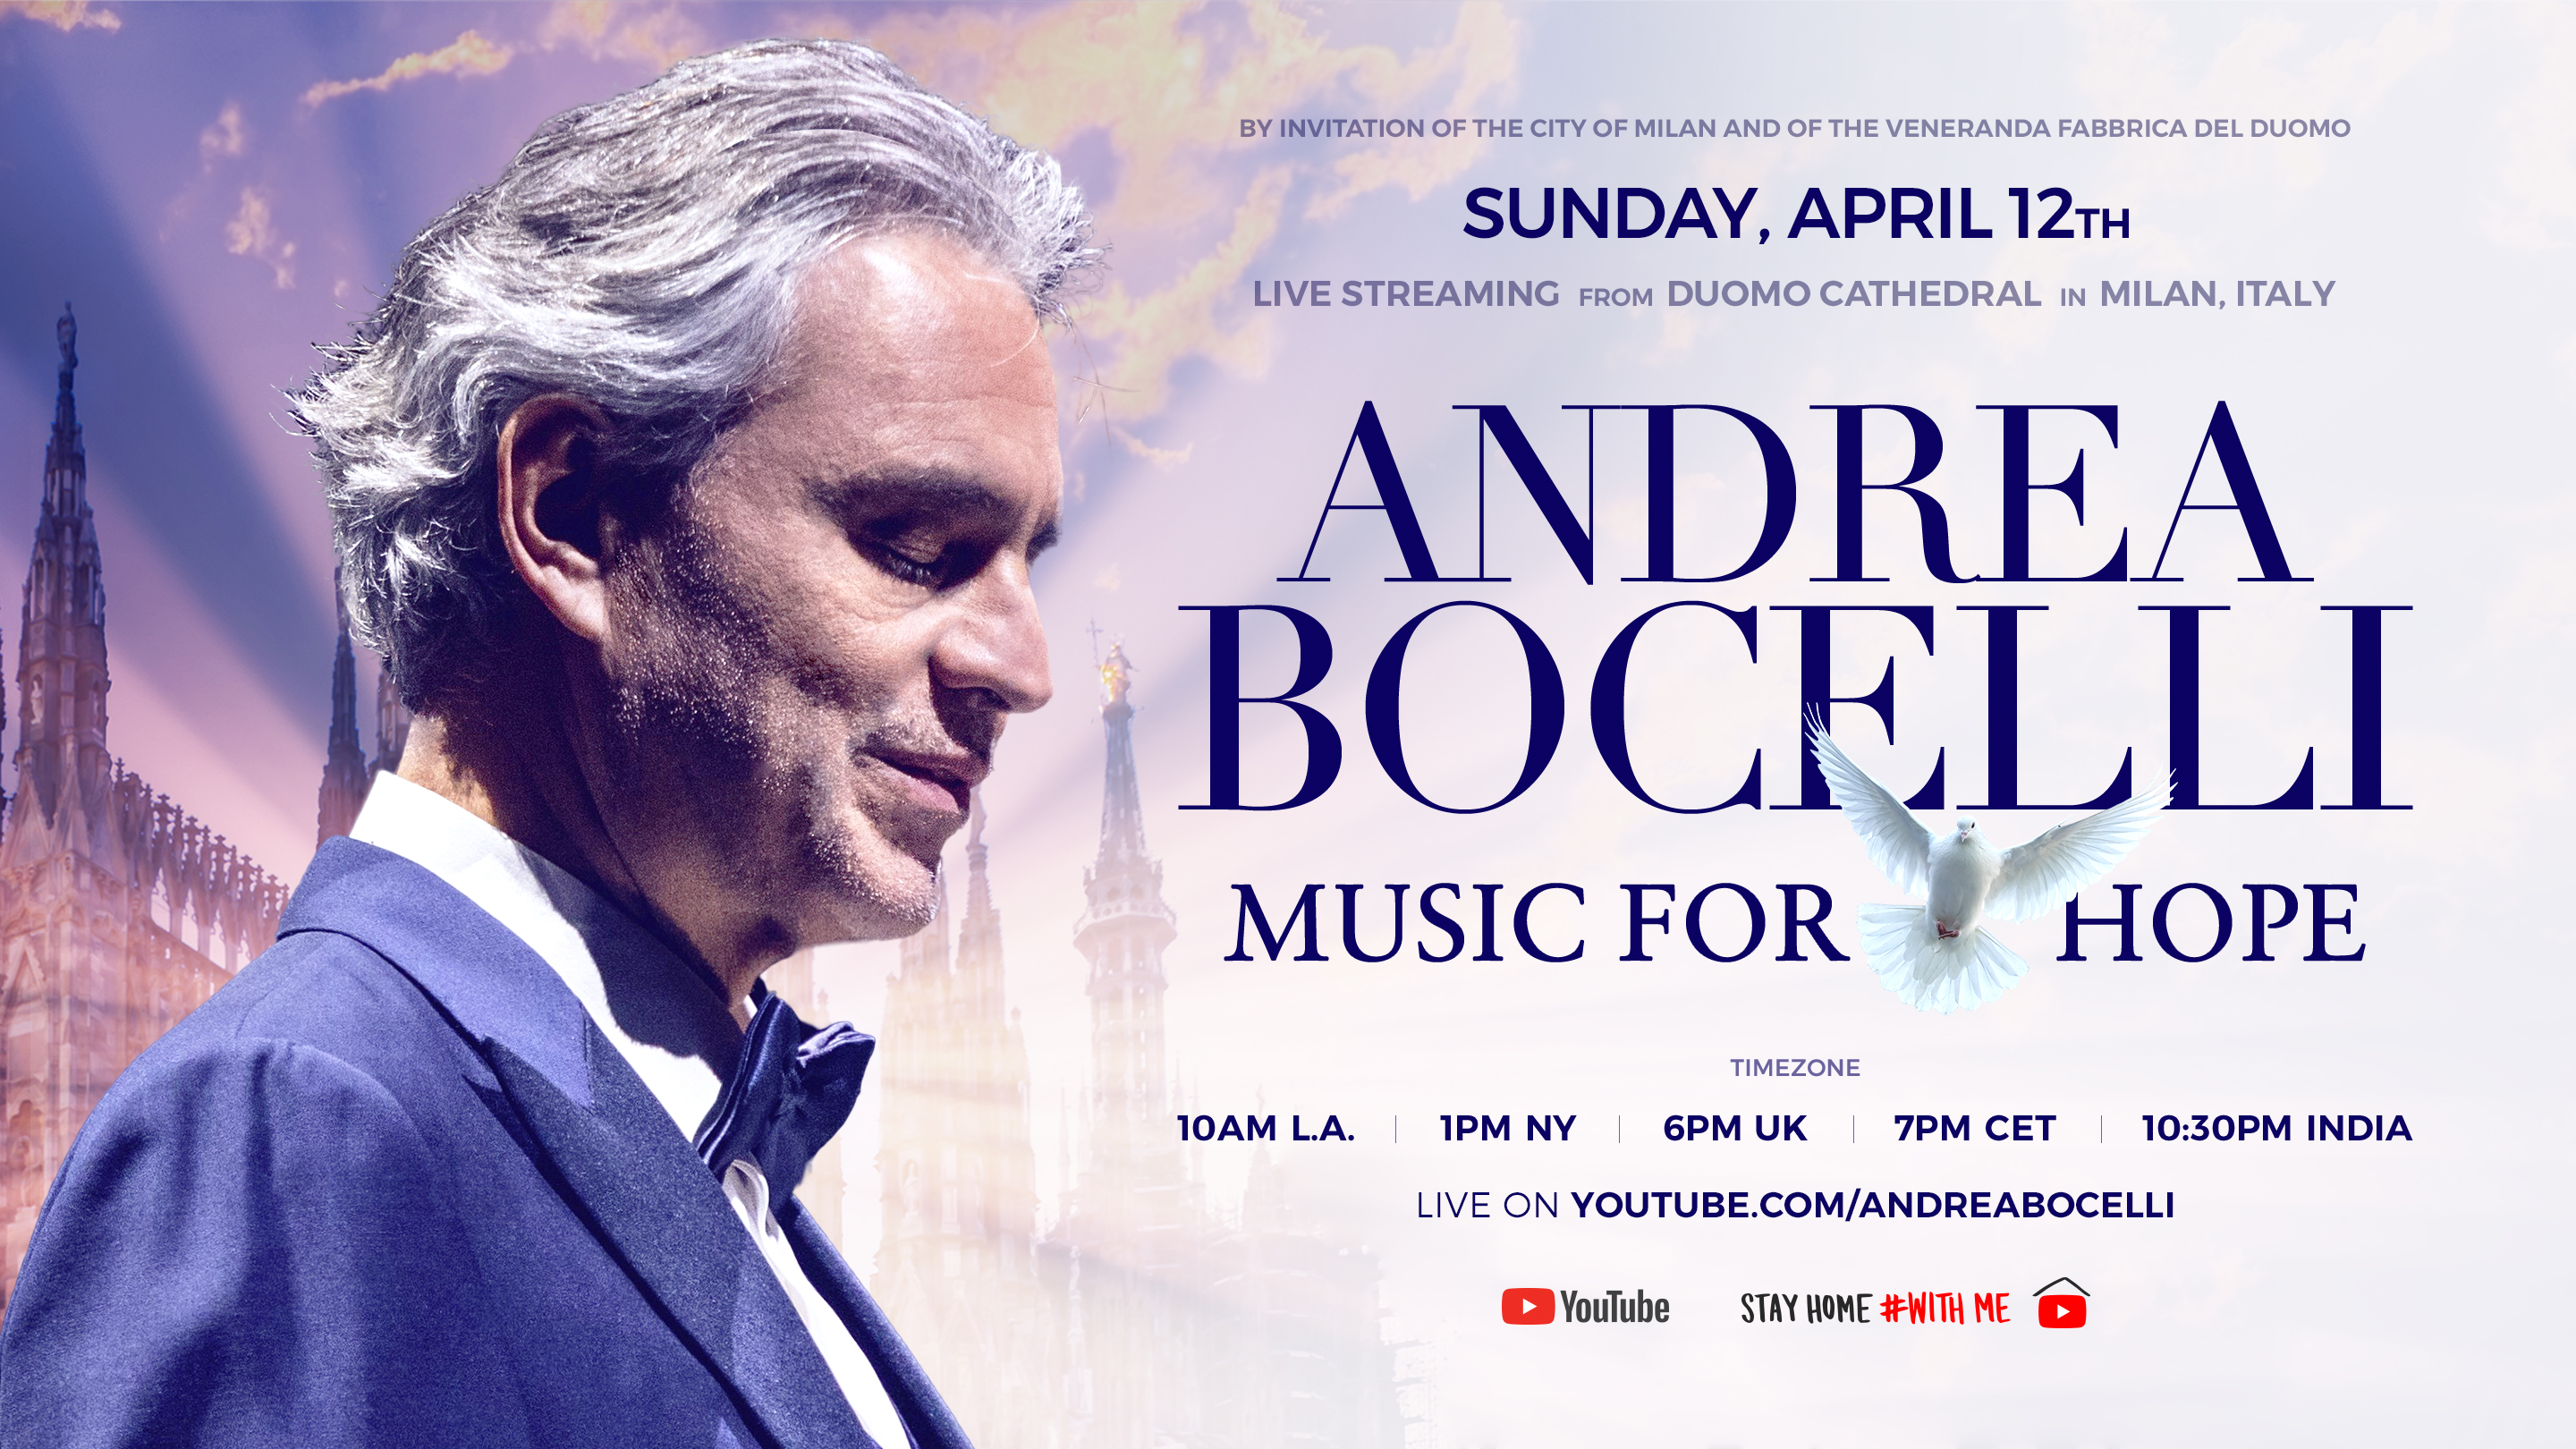 Bocelli in Duomo: “Music for hope”